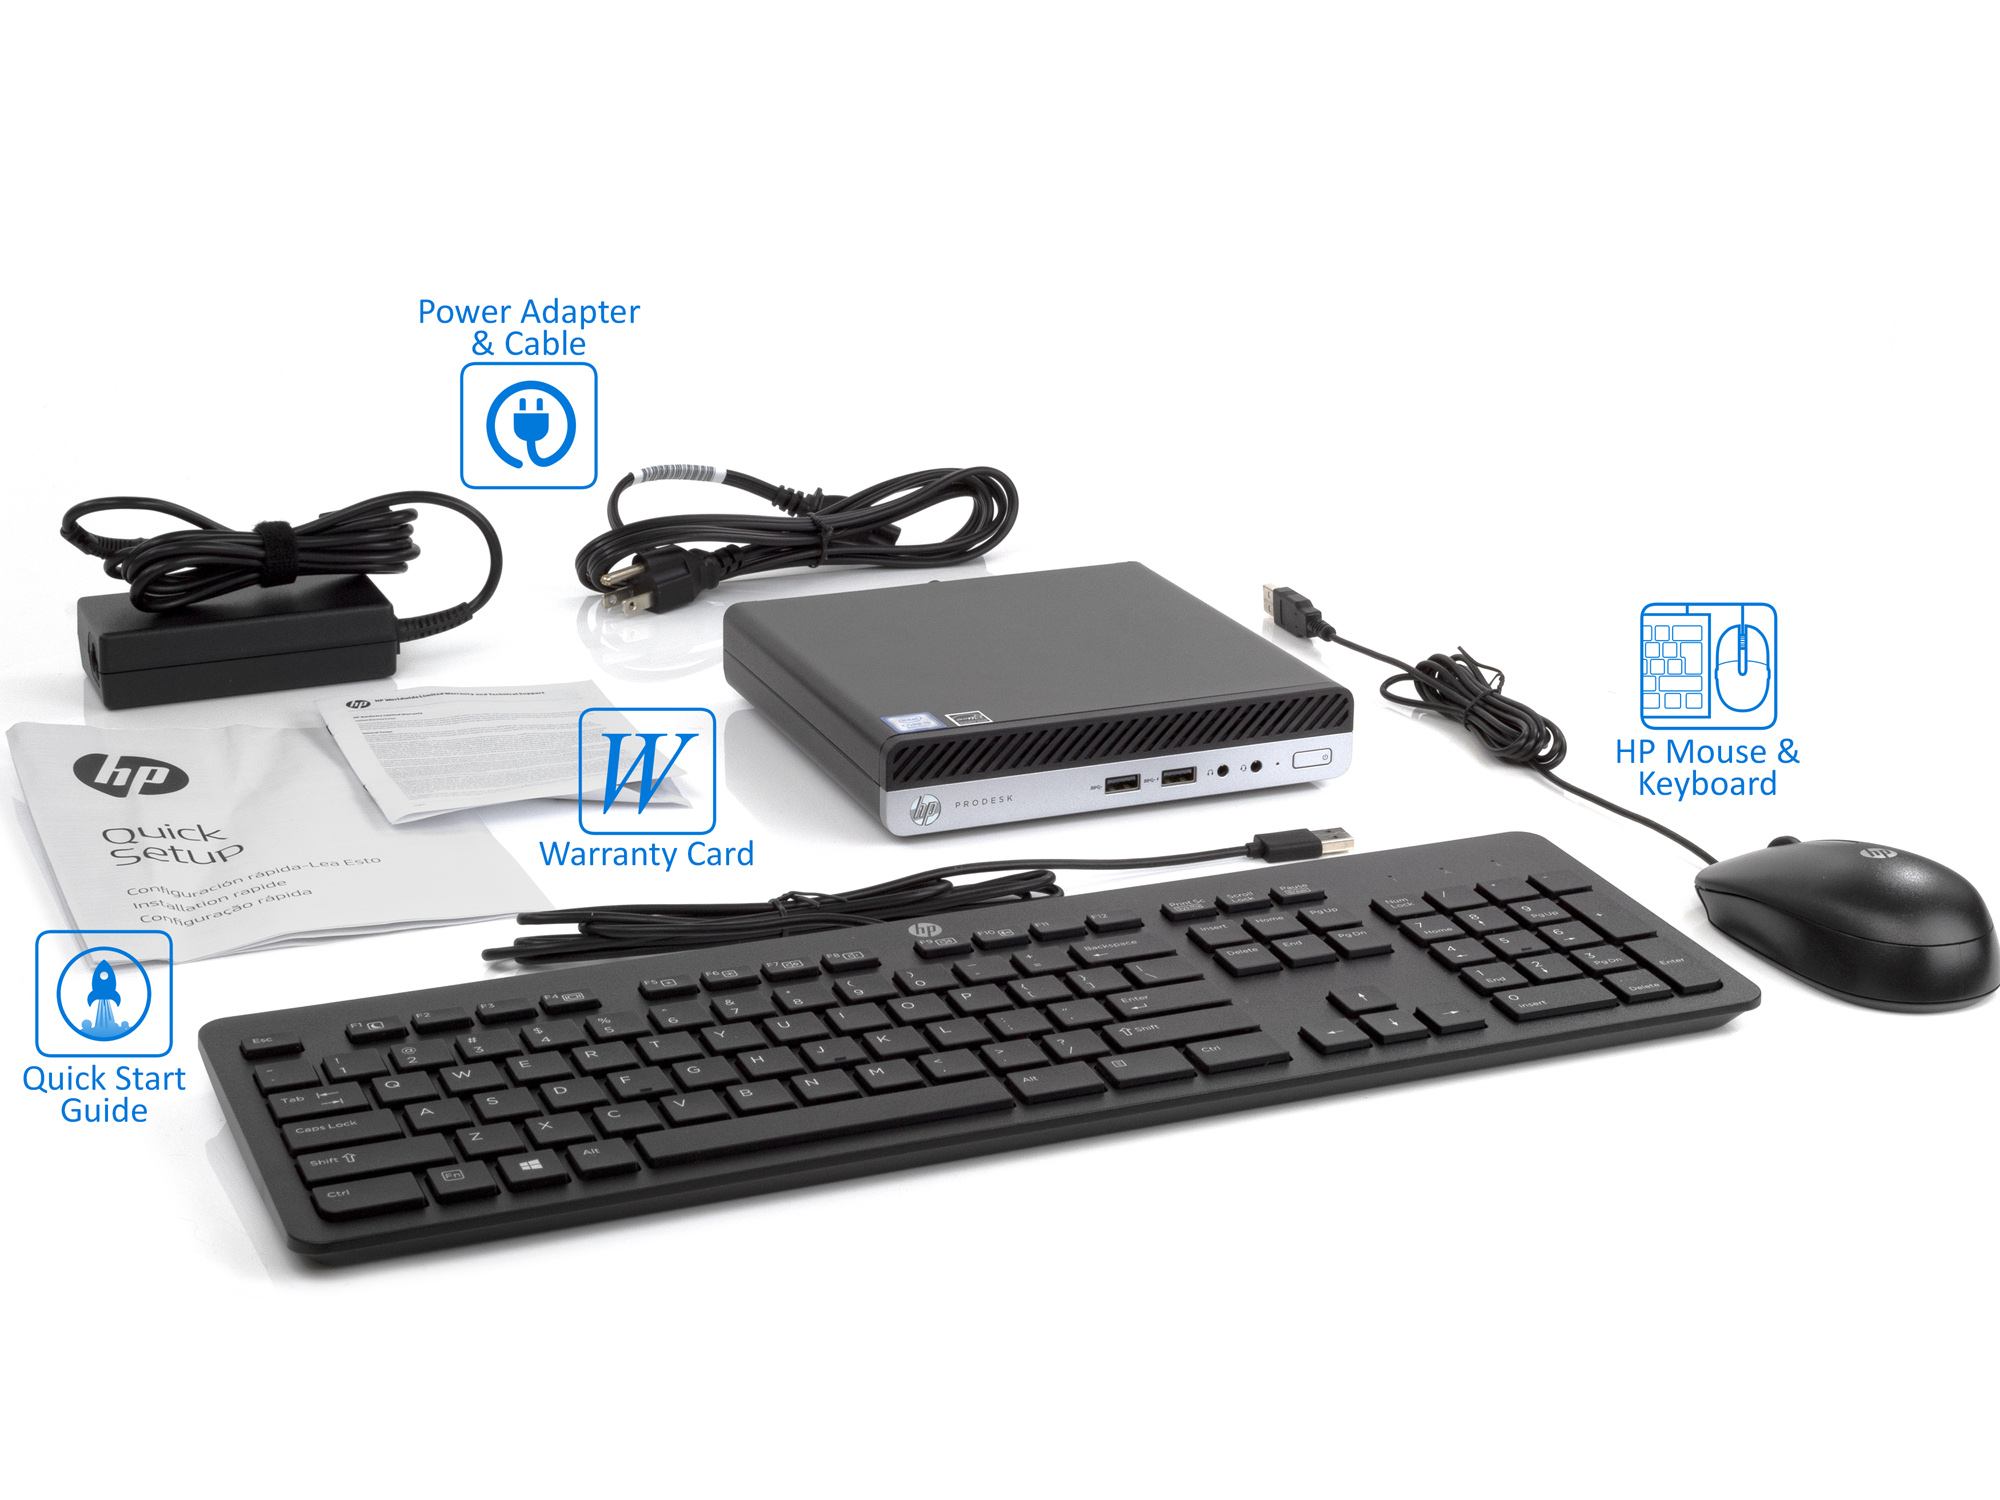 HP ProDesk 400 G4 Mini Review and Guide 